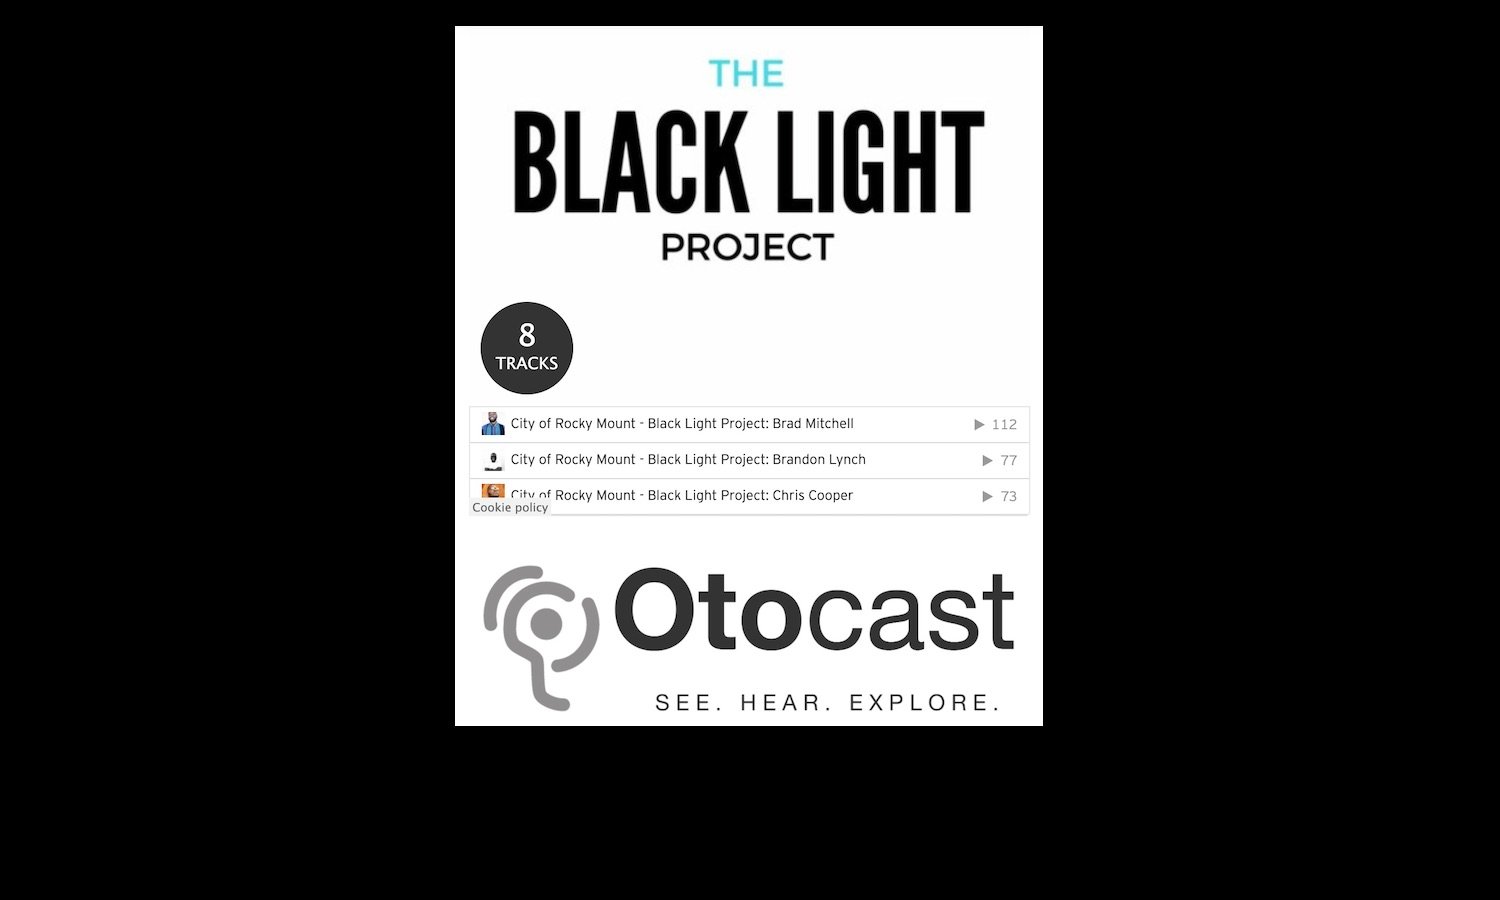  An audio component was created for each corresponding banner portrait. Available on the Otocast app, these audio tracks allow the viewer to hear each man featured share about themselves and their lives in their own voice. 